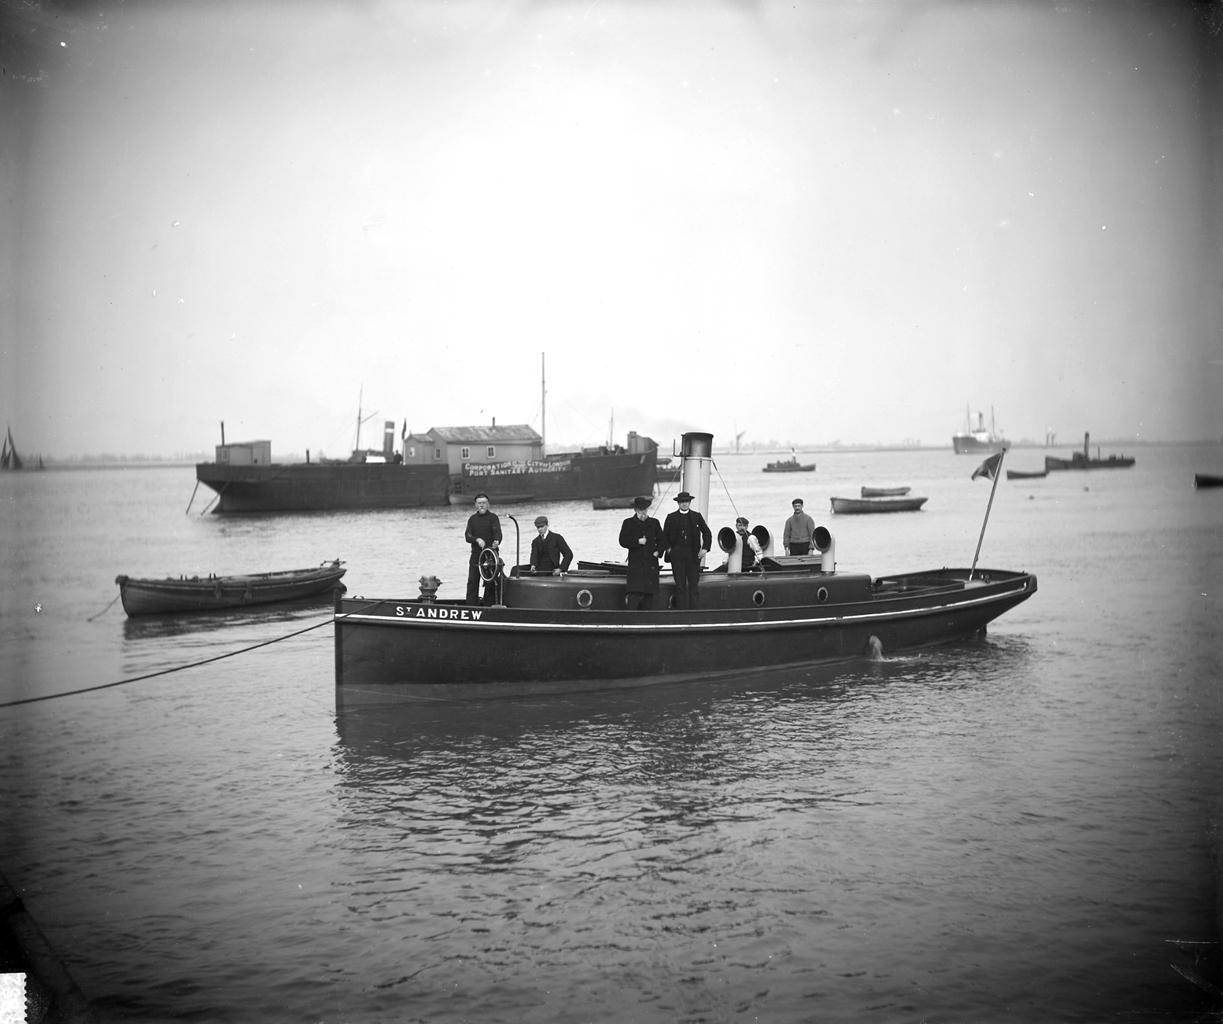 A photograph by F.C. Gould & Son showing the mission launch St. Andrew off Gravesend circa 1905..JPG